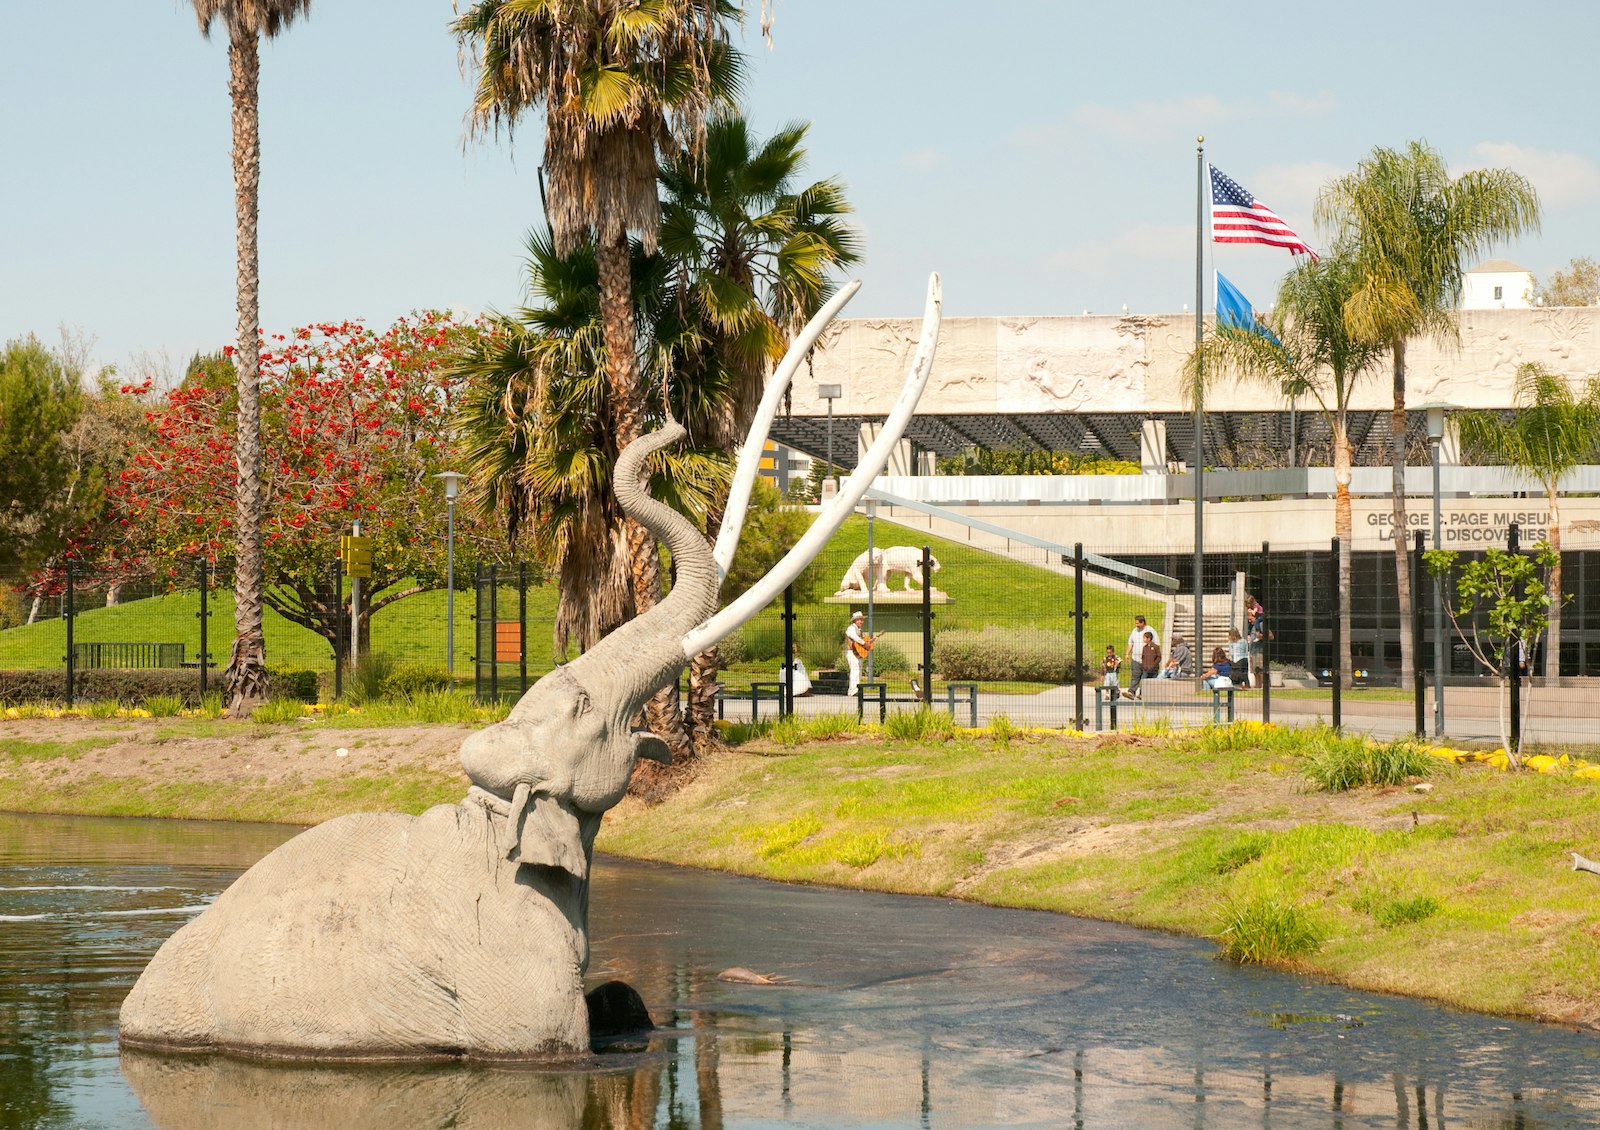 A mammoth sculpture in a tar pit, tusks and trunk pointed at the sky